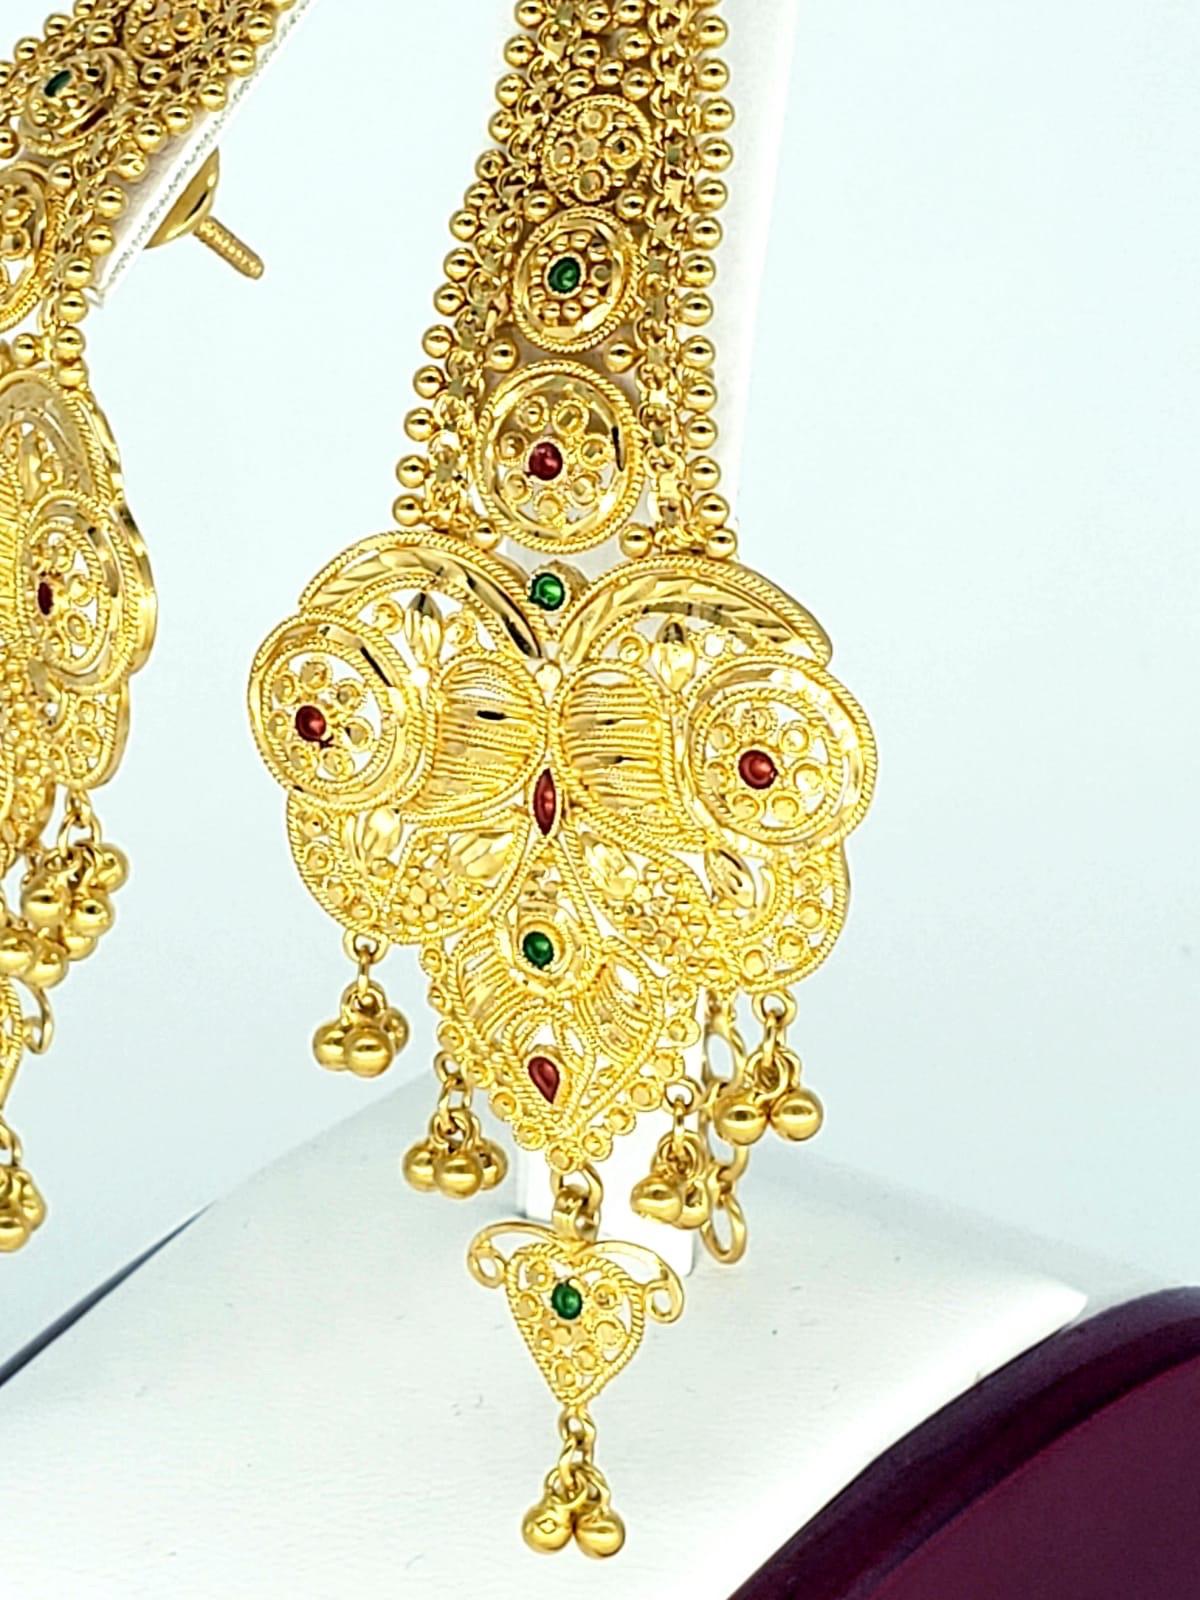 KDM Ornate/Detailed 22 Karat India Royal Wedding Drop Earrings In Excellent Condition For Sale In Miami, FL